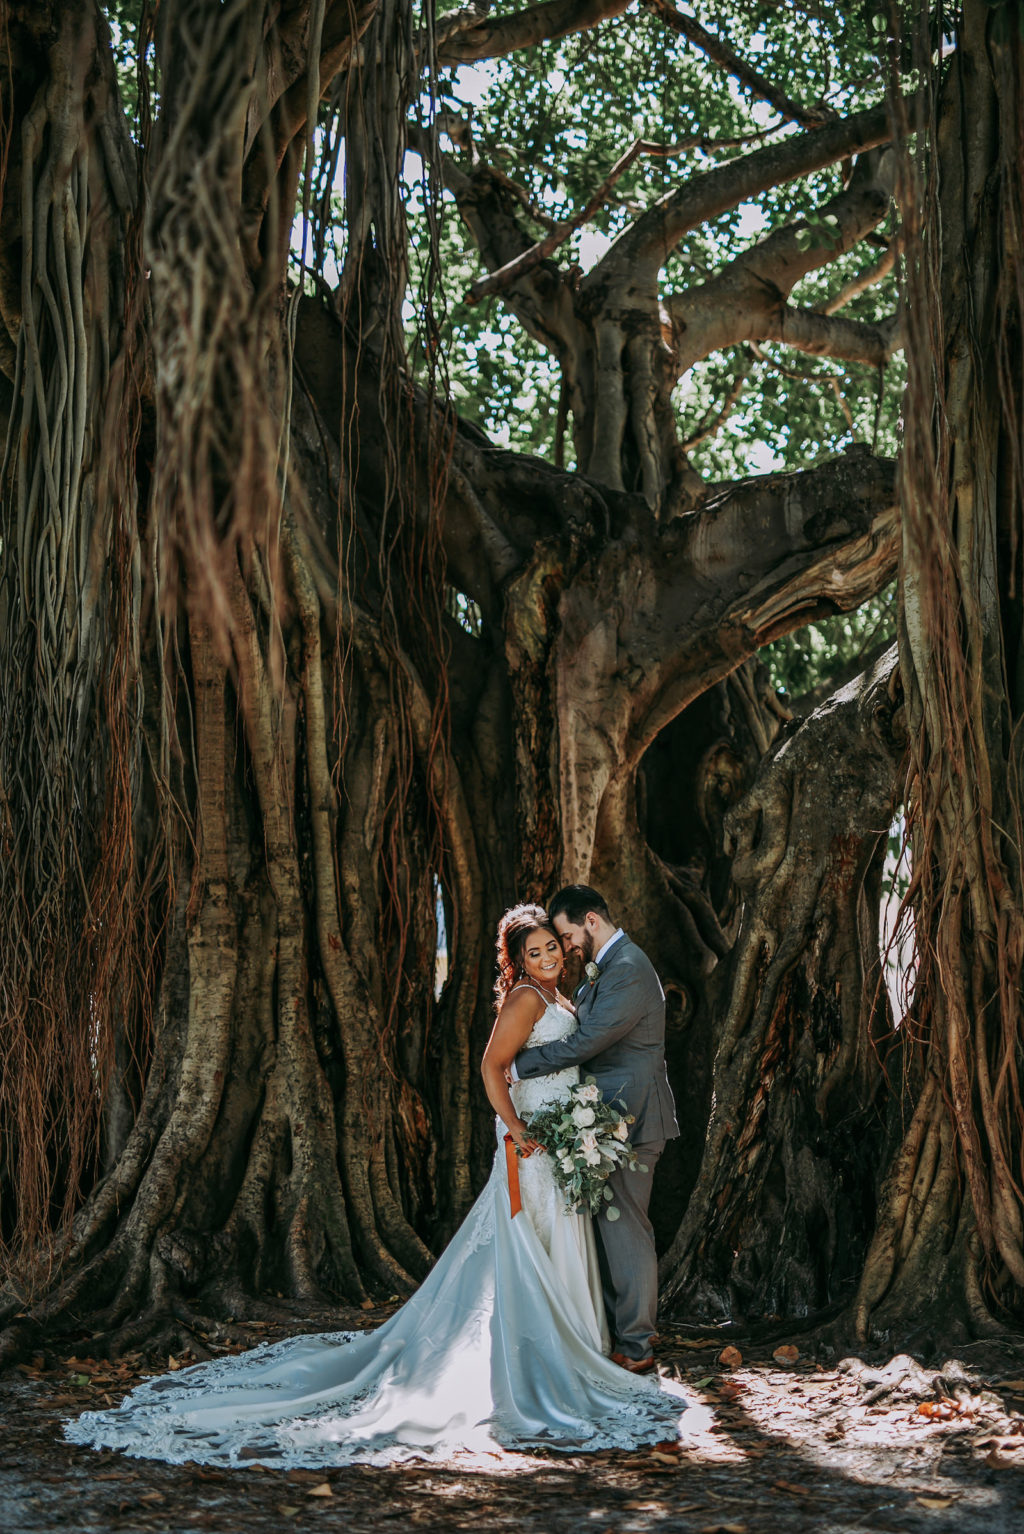 Outdoor Bride and Groom Portrait in front of Banyan Trees in Vinoy Park Downtown St. Pete Florida | Groom Wearing Classic Charcoal Grey Suit with Green Tie | Lace Fit and Flare Mermaid Spaghetti Strap Wedding Dress Bridal Gown with Scallop Edge Lace Train Hem